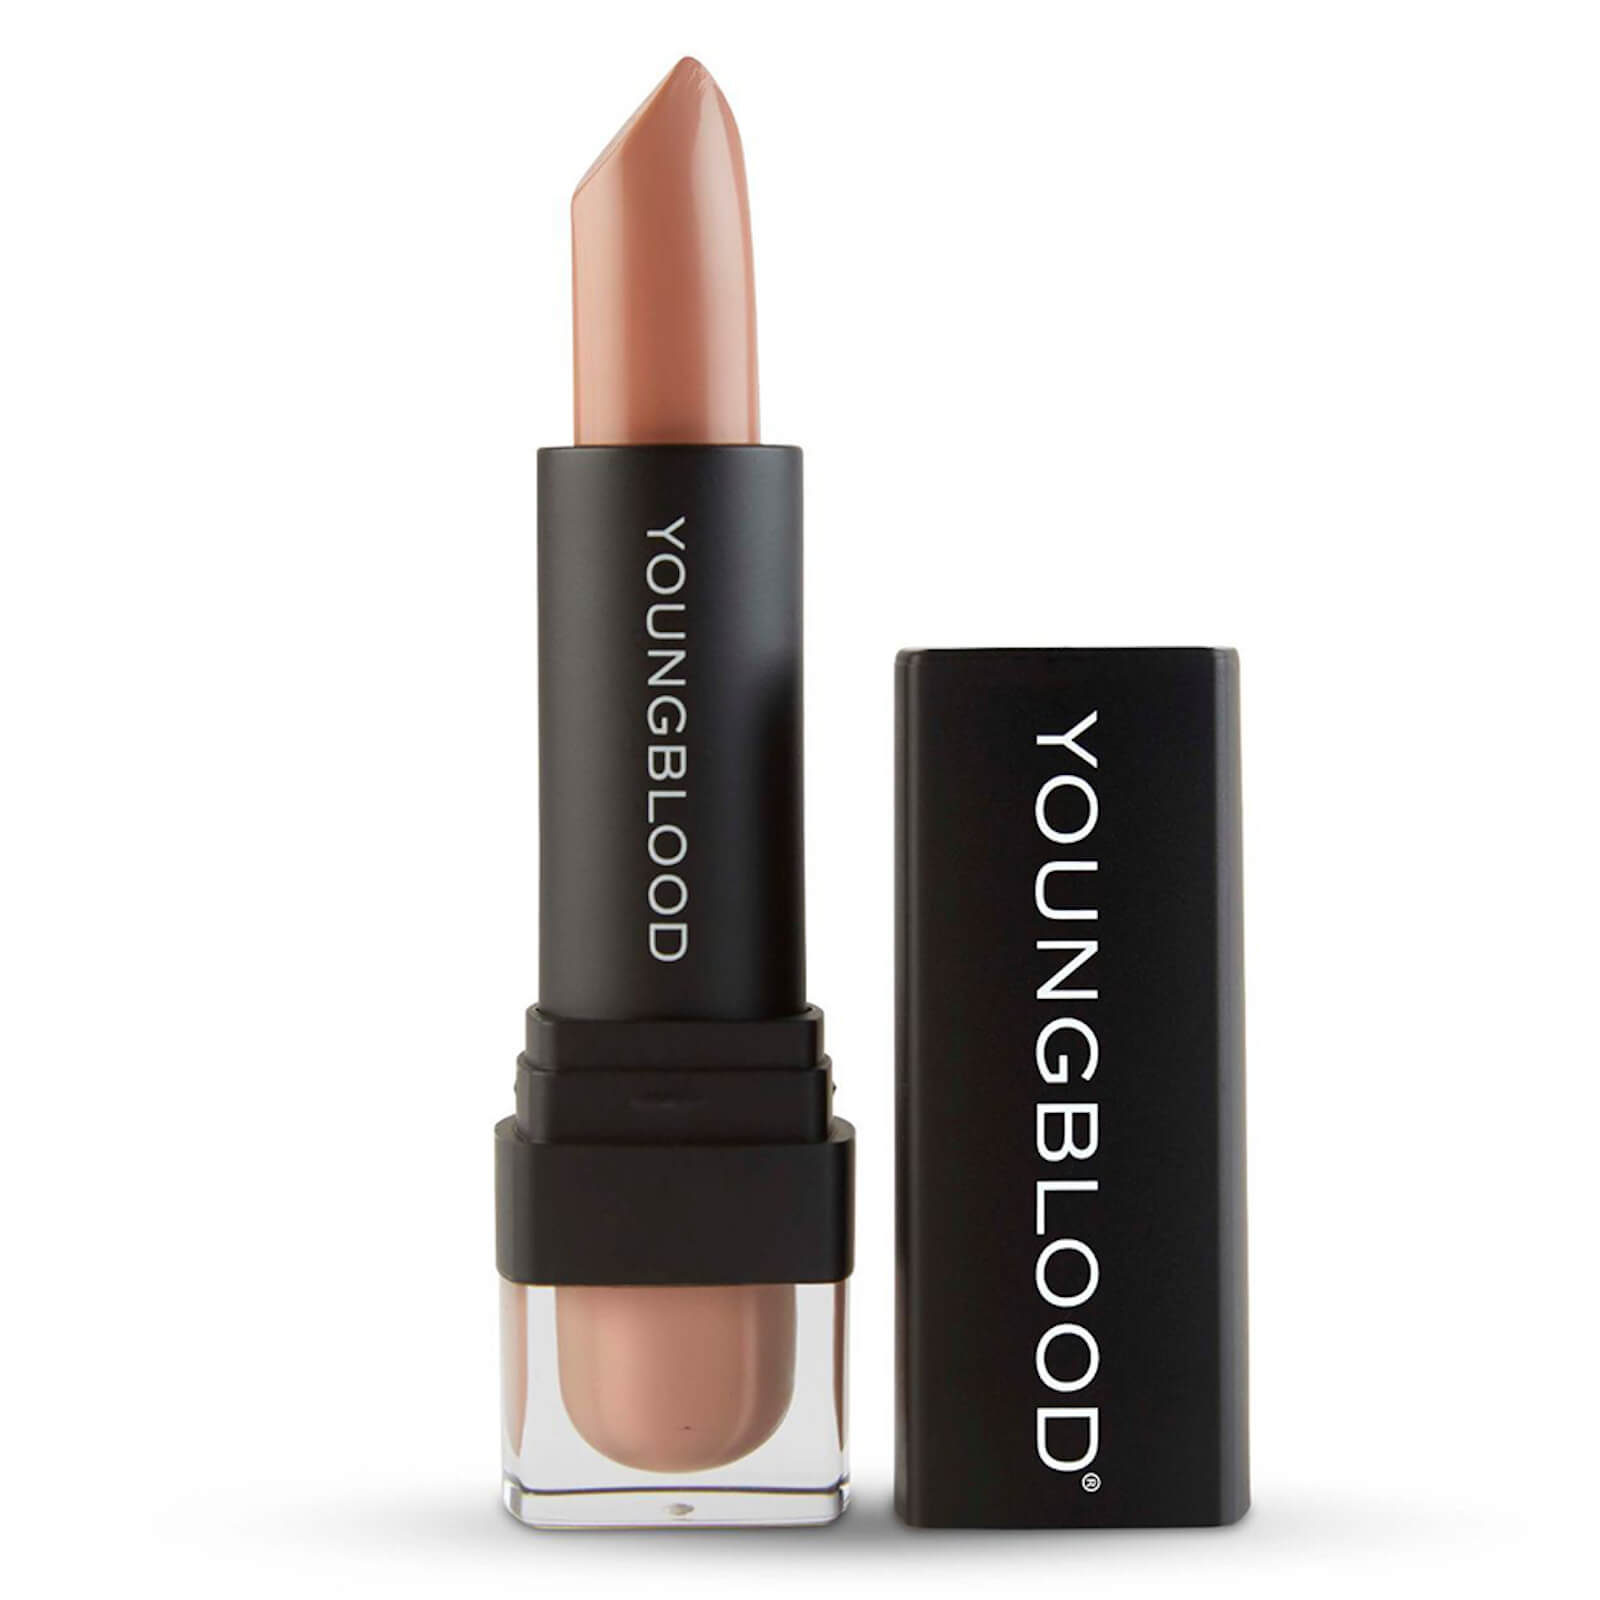 Youngblood Mineral Cosmetics Youngblood Mineral Crème Lipstick 4g (Various Shades) - Naked